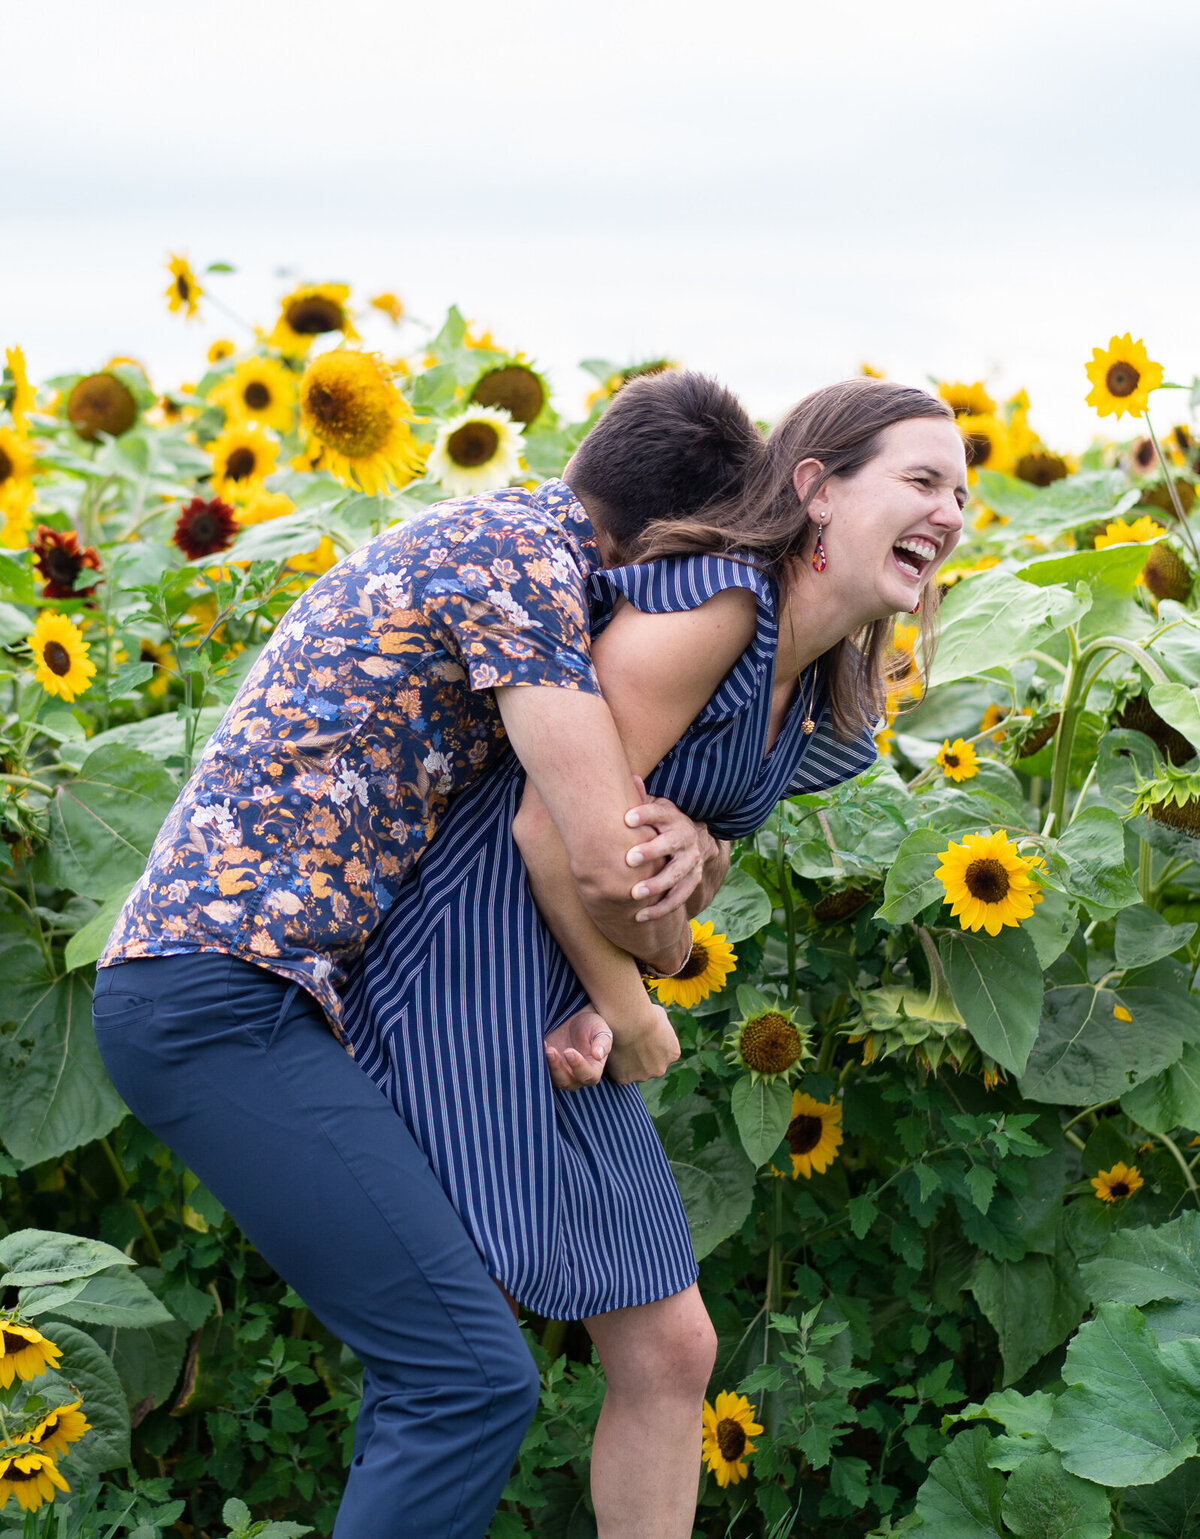 Anthony Martino giving his girlfriend, Eva, a big hug from behind at S'miles of Sunflowers at Lynd Fruit Farm in Pataskala, Ohio.